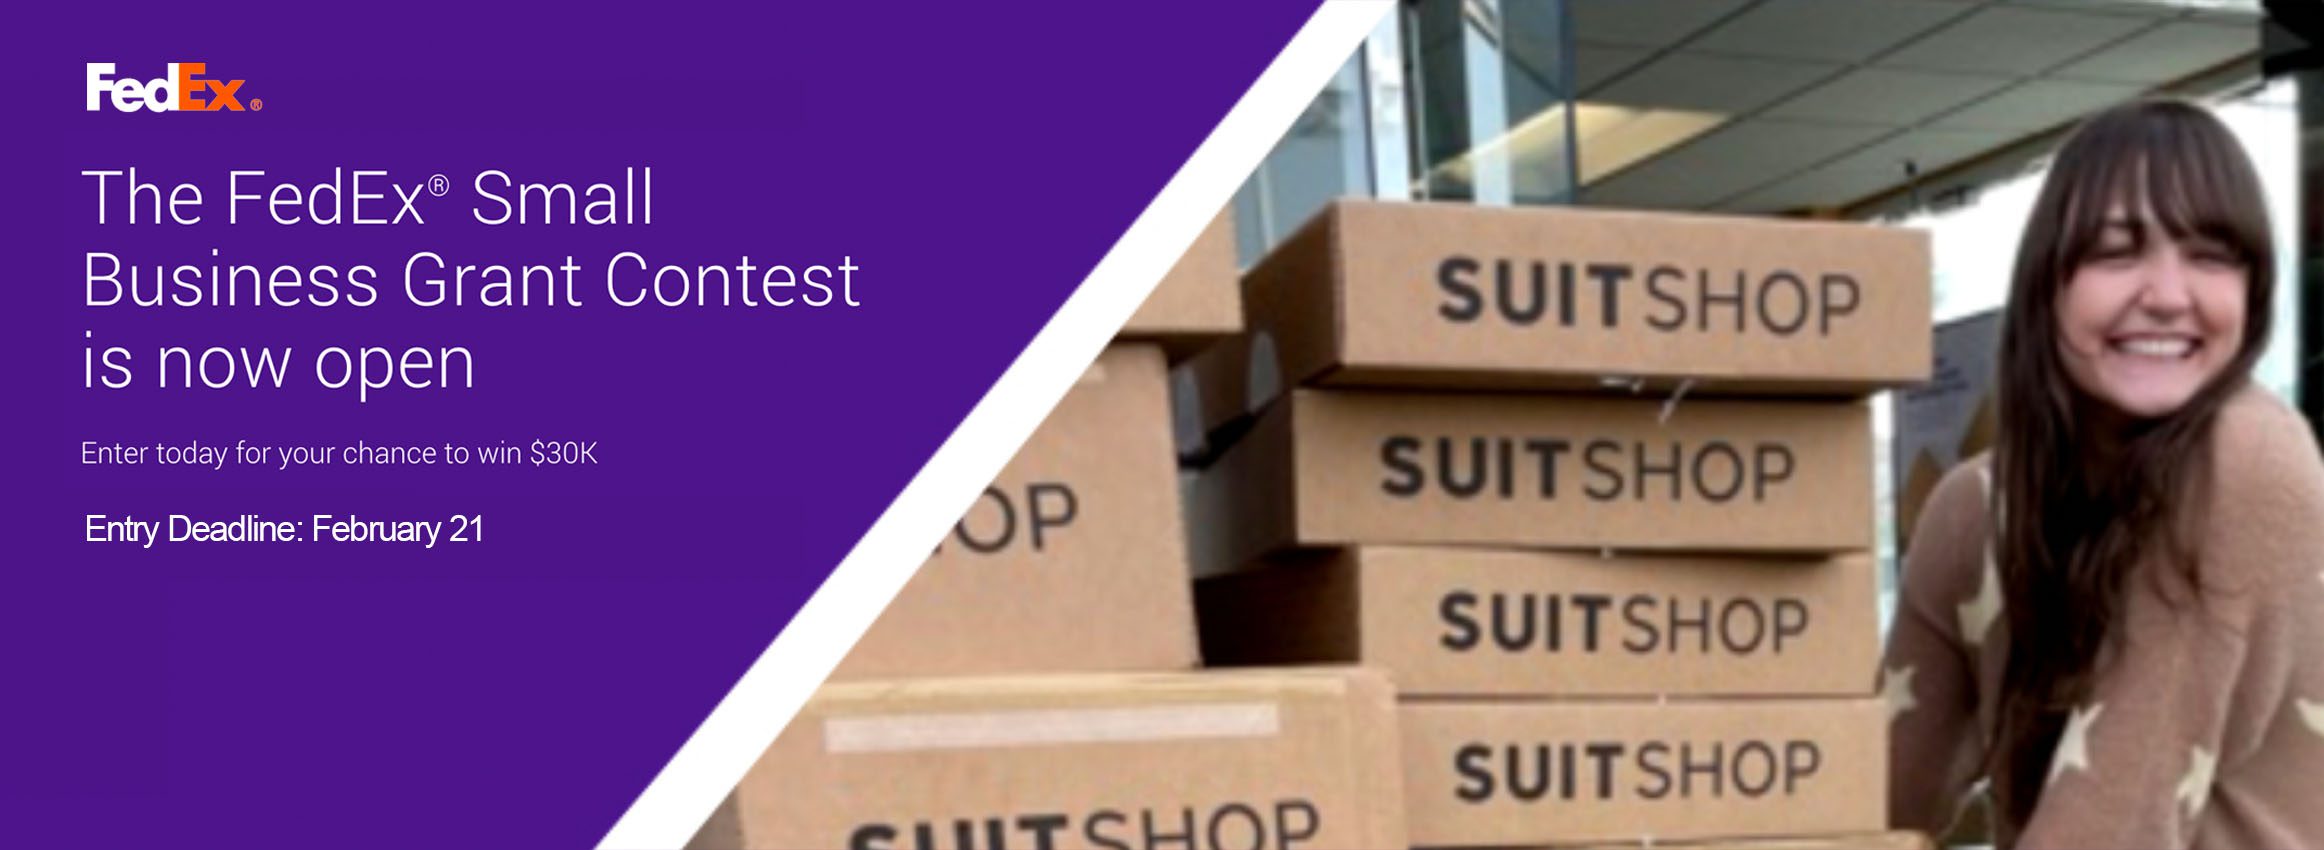 FedEx Small Business Grant Contest is Now Open